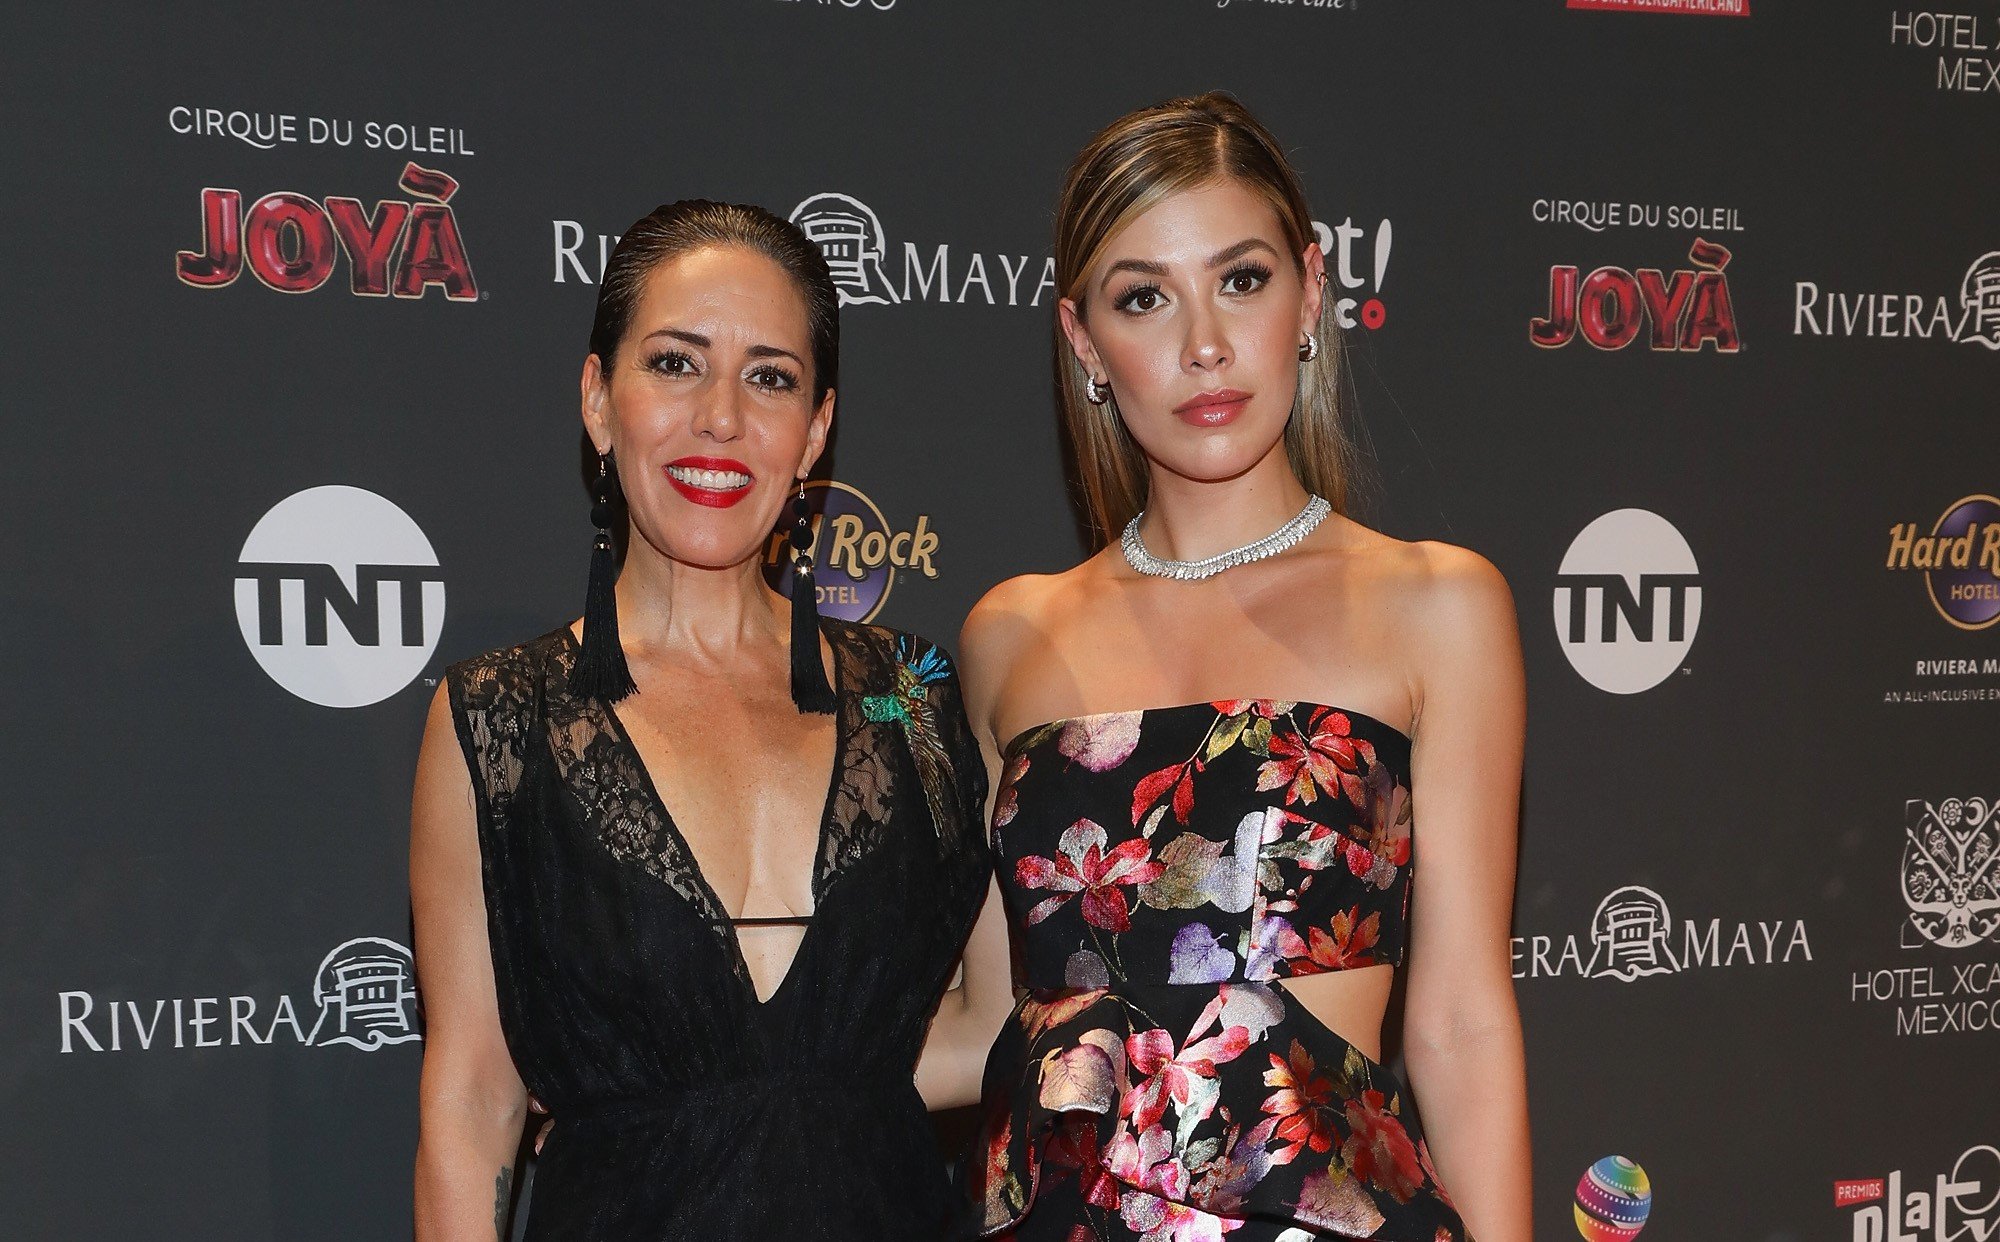 : Stephanie Salas and Michelle Salas at the Premios Platino 2019, in Playa del Carmen, Mexico. | Source: Getty Images